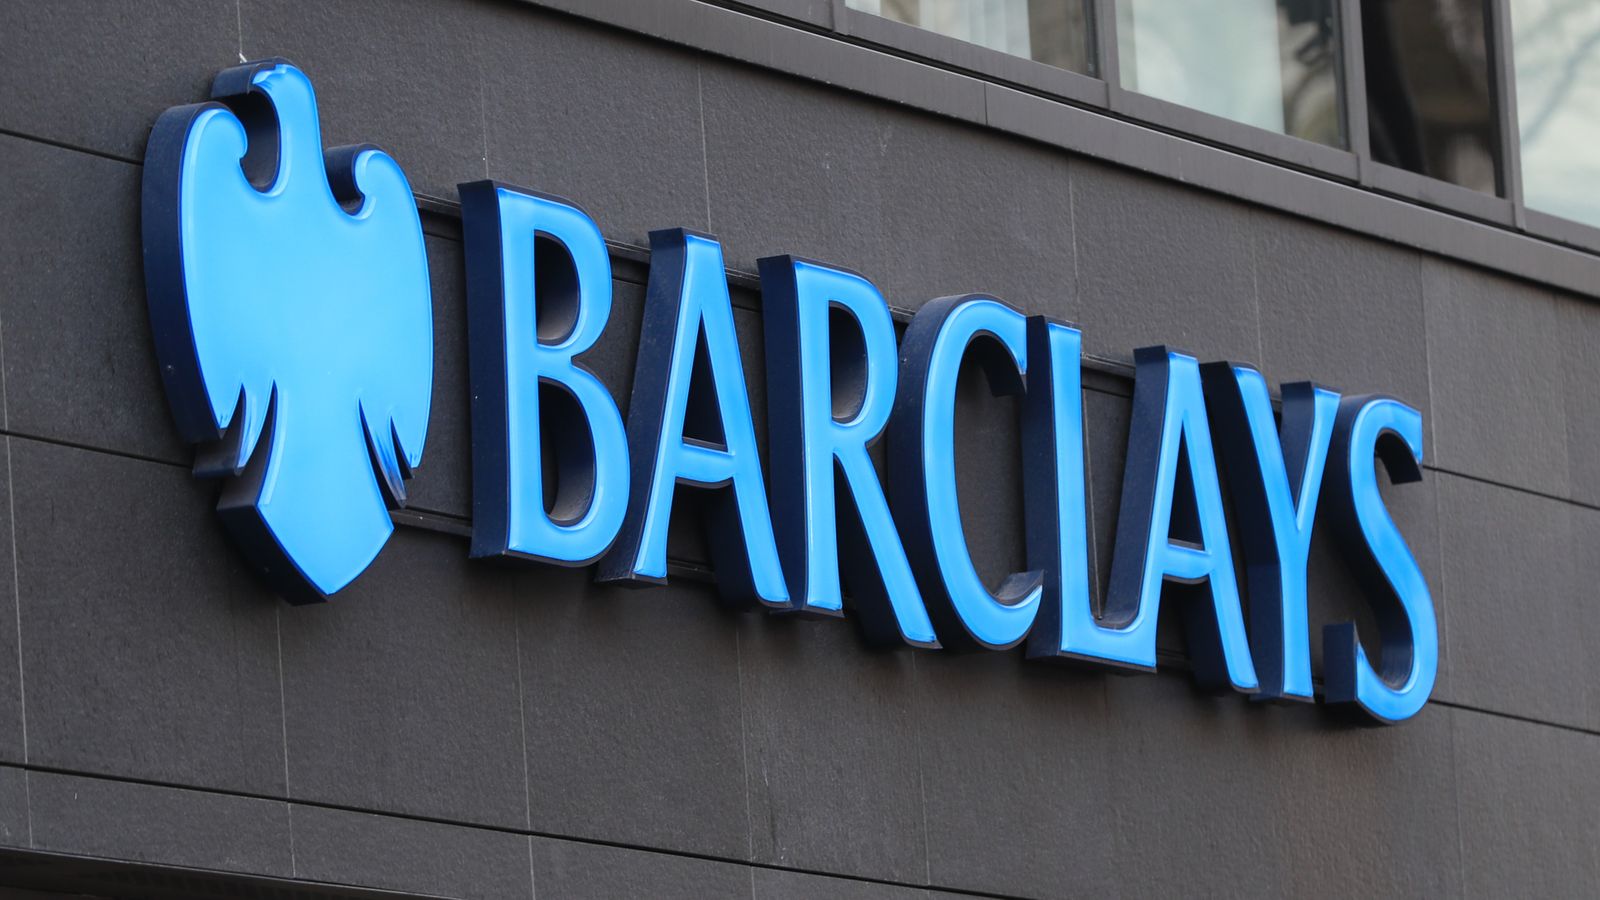 Barclays joins ranks of investment banks wielding jobs axe